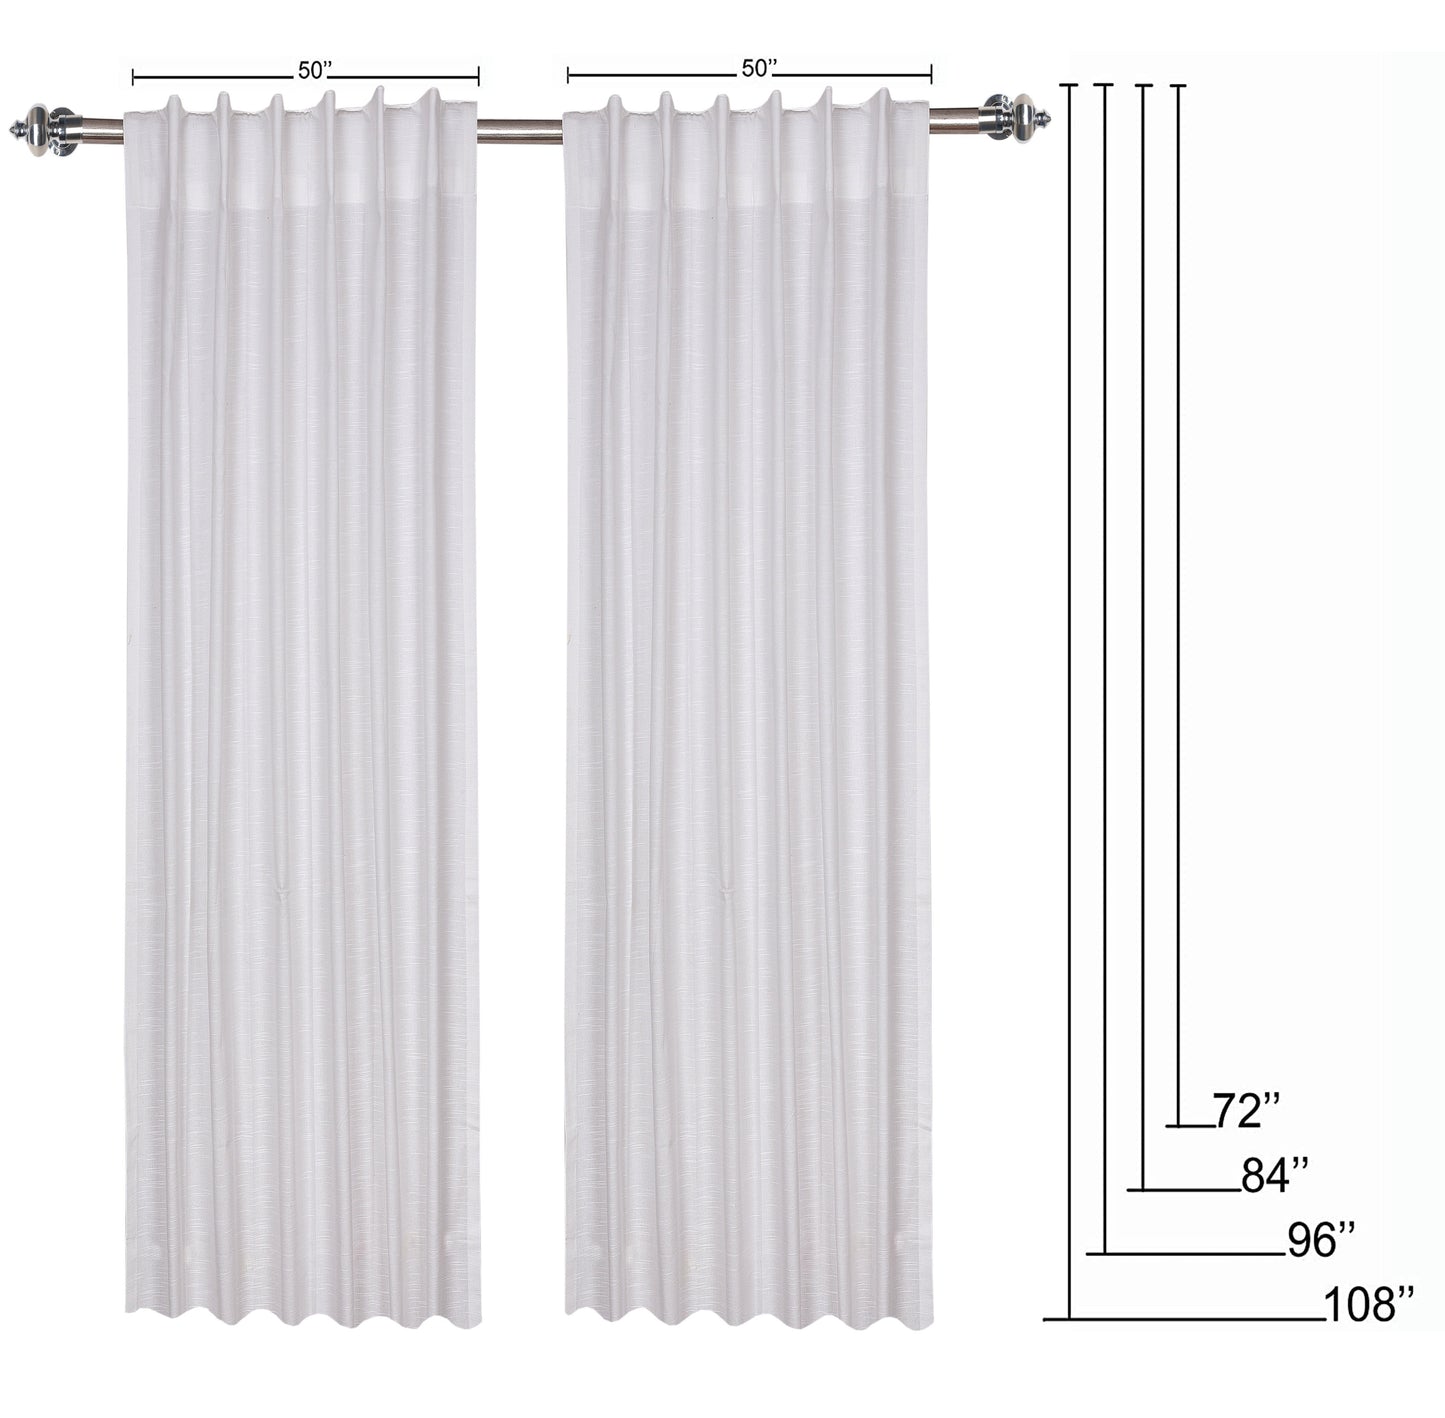 Slub Cotton Window Curtains white linen living room curtains 2 panel sets modern curtains for living room Reverse Tab Top 50 x 108 inch set of 2 Panelsboho cafDoorway curtains by Lushomes